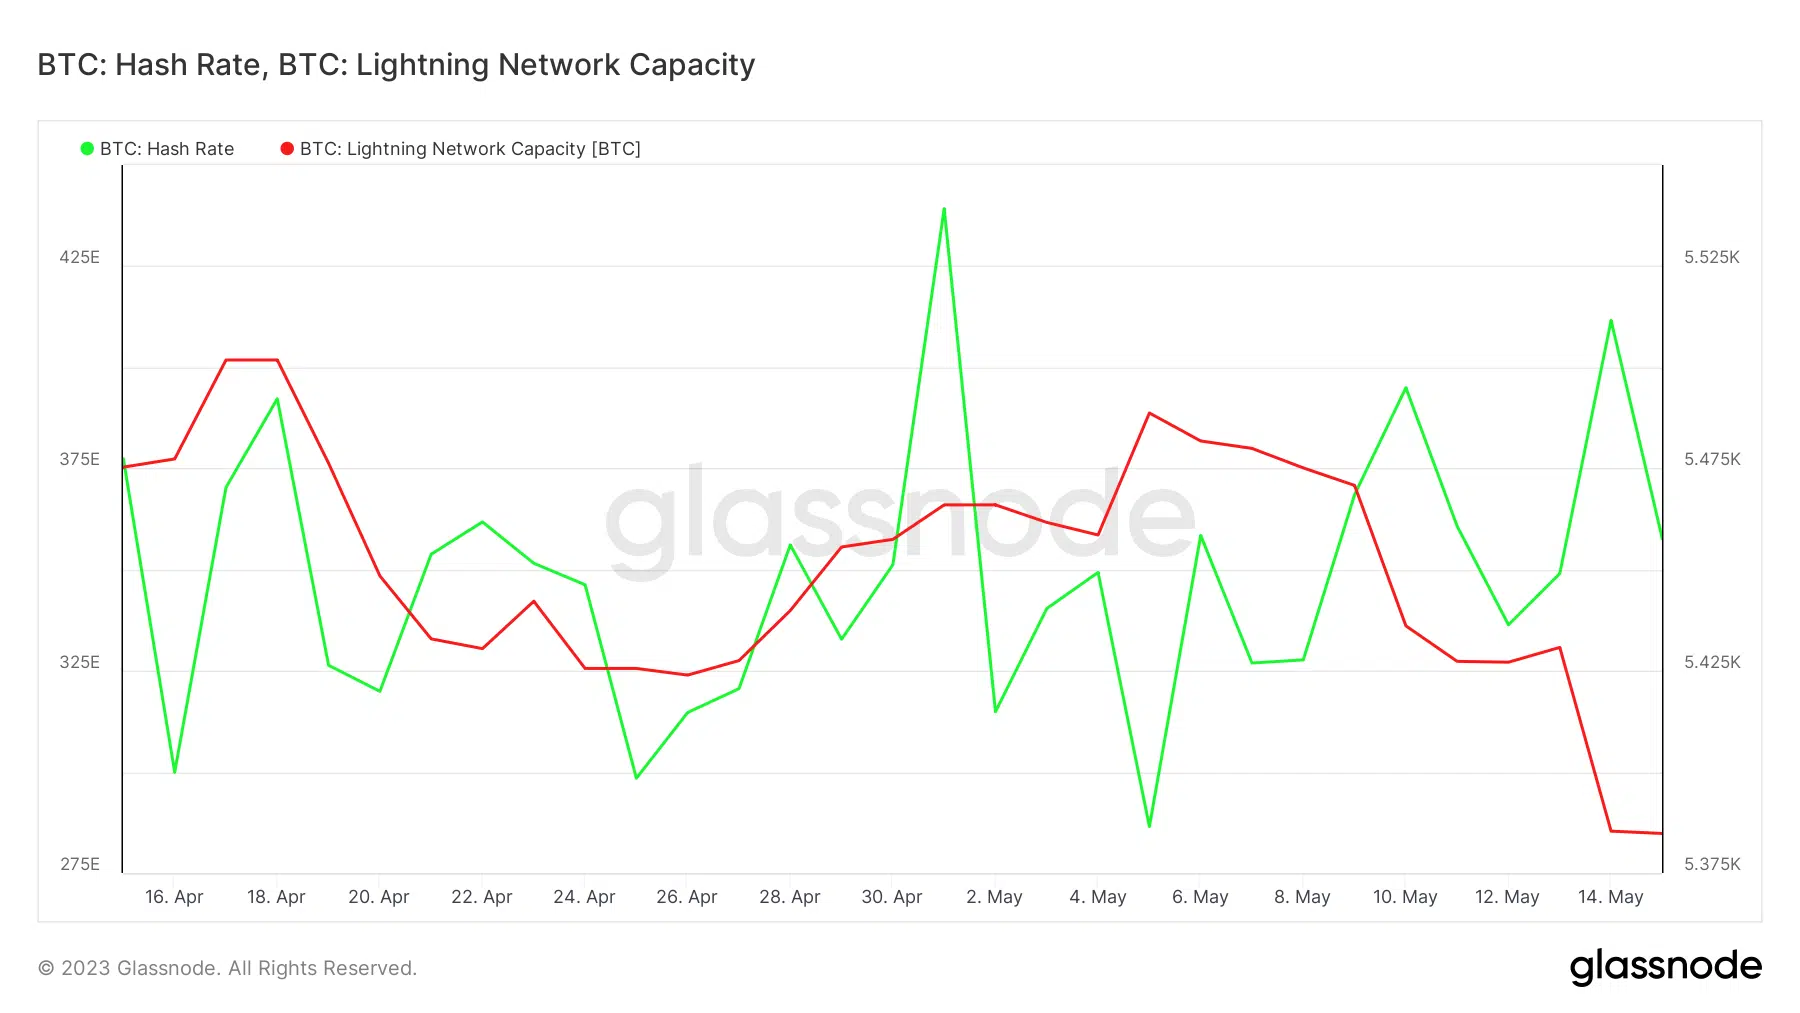 Bitcoin hash rate and network capacity